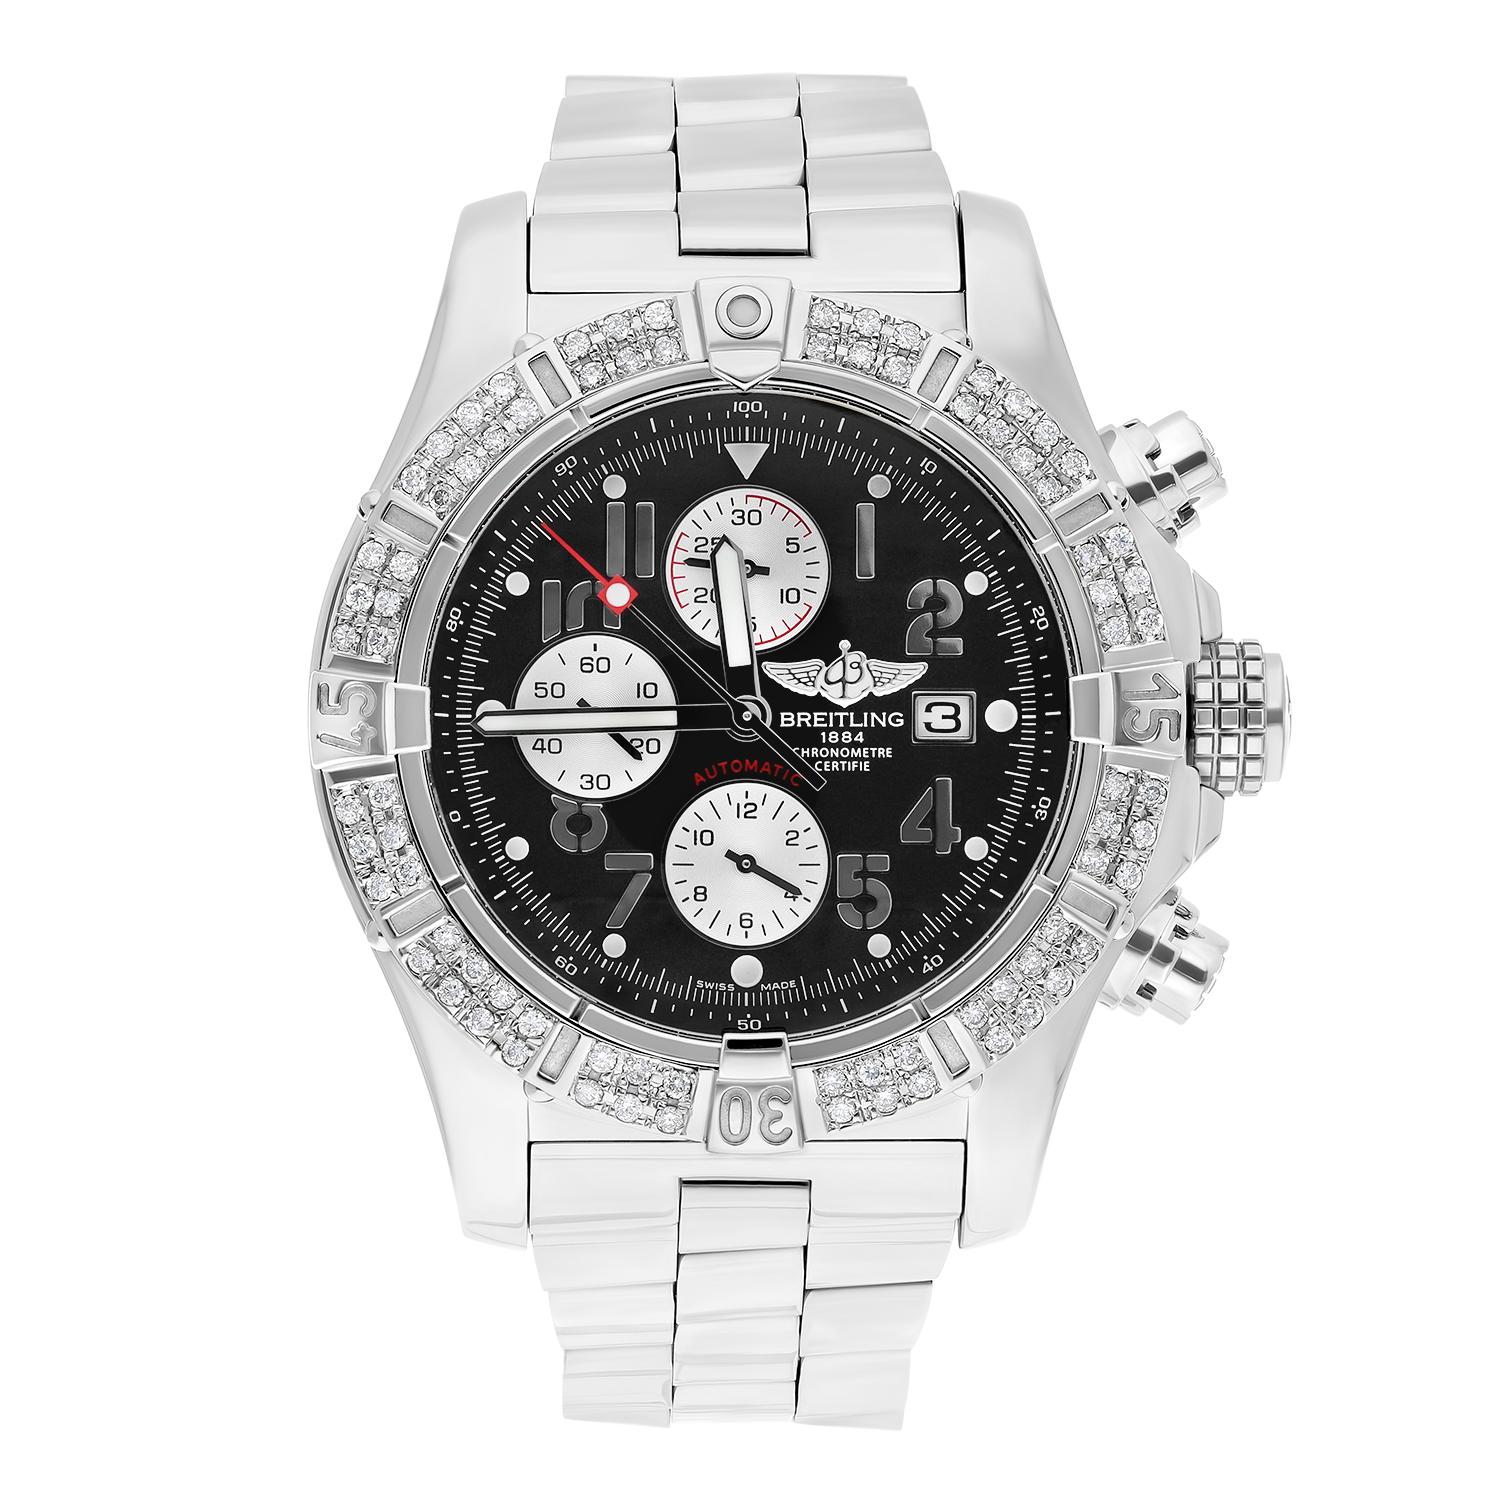 Brand: Breitling
Series: Super Avenger
Model: A13370
Case Diameter: 48 mm
Bracelet: Stainless steel
Bezel: Custom diamond set
Dial: Black dial
The sale includes a jewelry watch box and an appraisal certificate which states the watch's